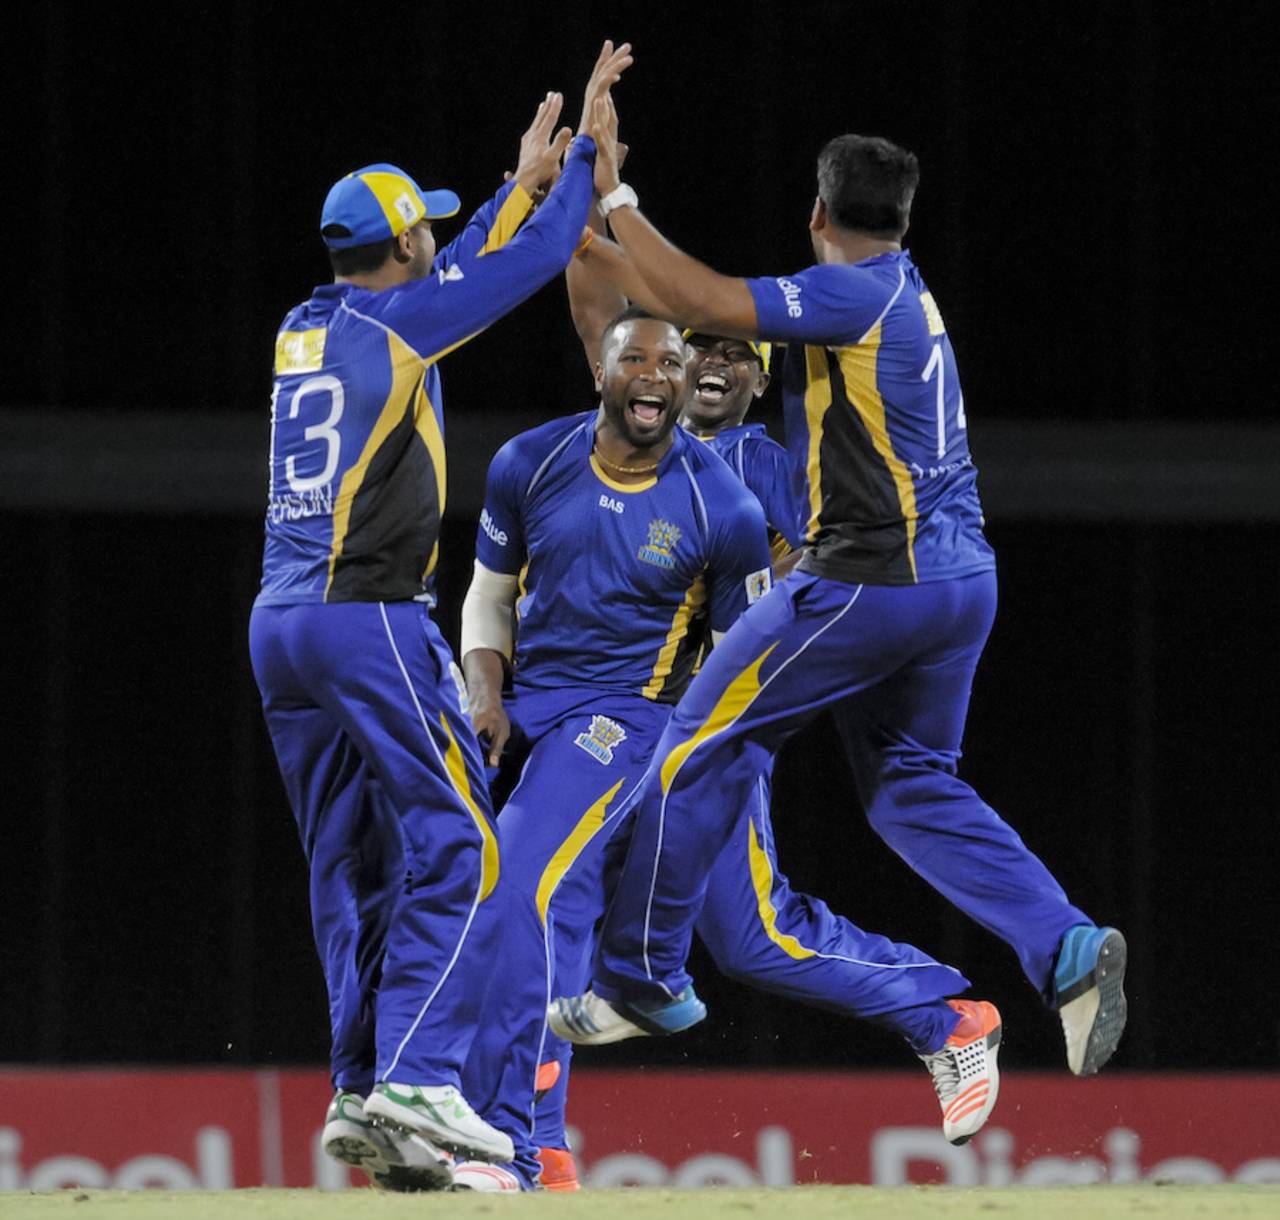 Barbados Tridents may be the defending champions but at the boardroom the picture is far from rosy&nbsp;&nbsp;&bull;&nbsp;&nbsp;CPL T20 Ltd.2015 